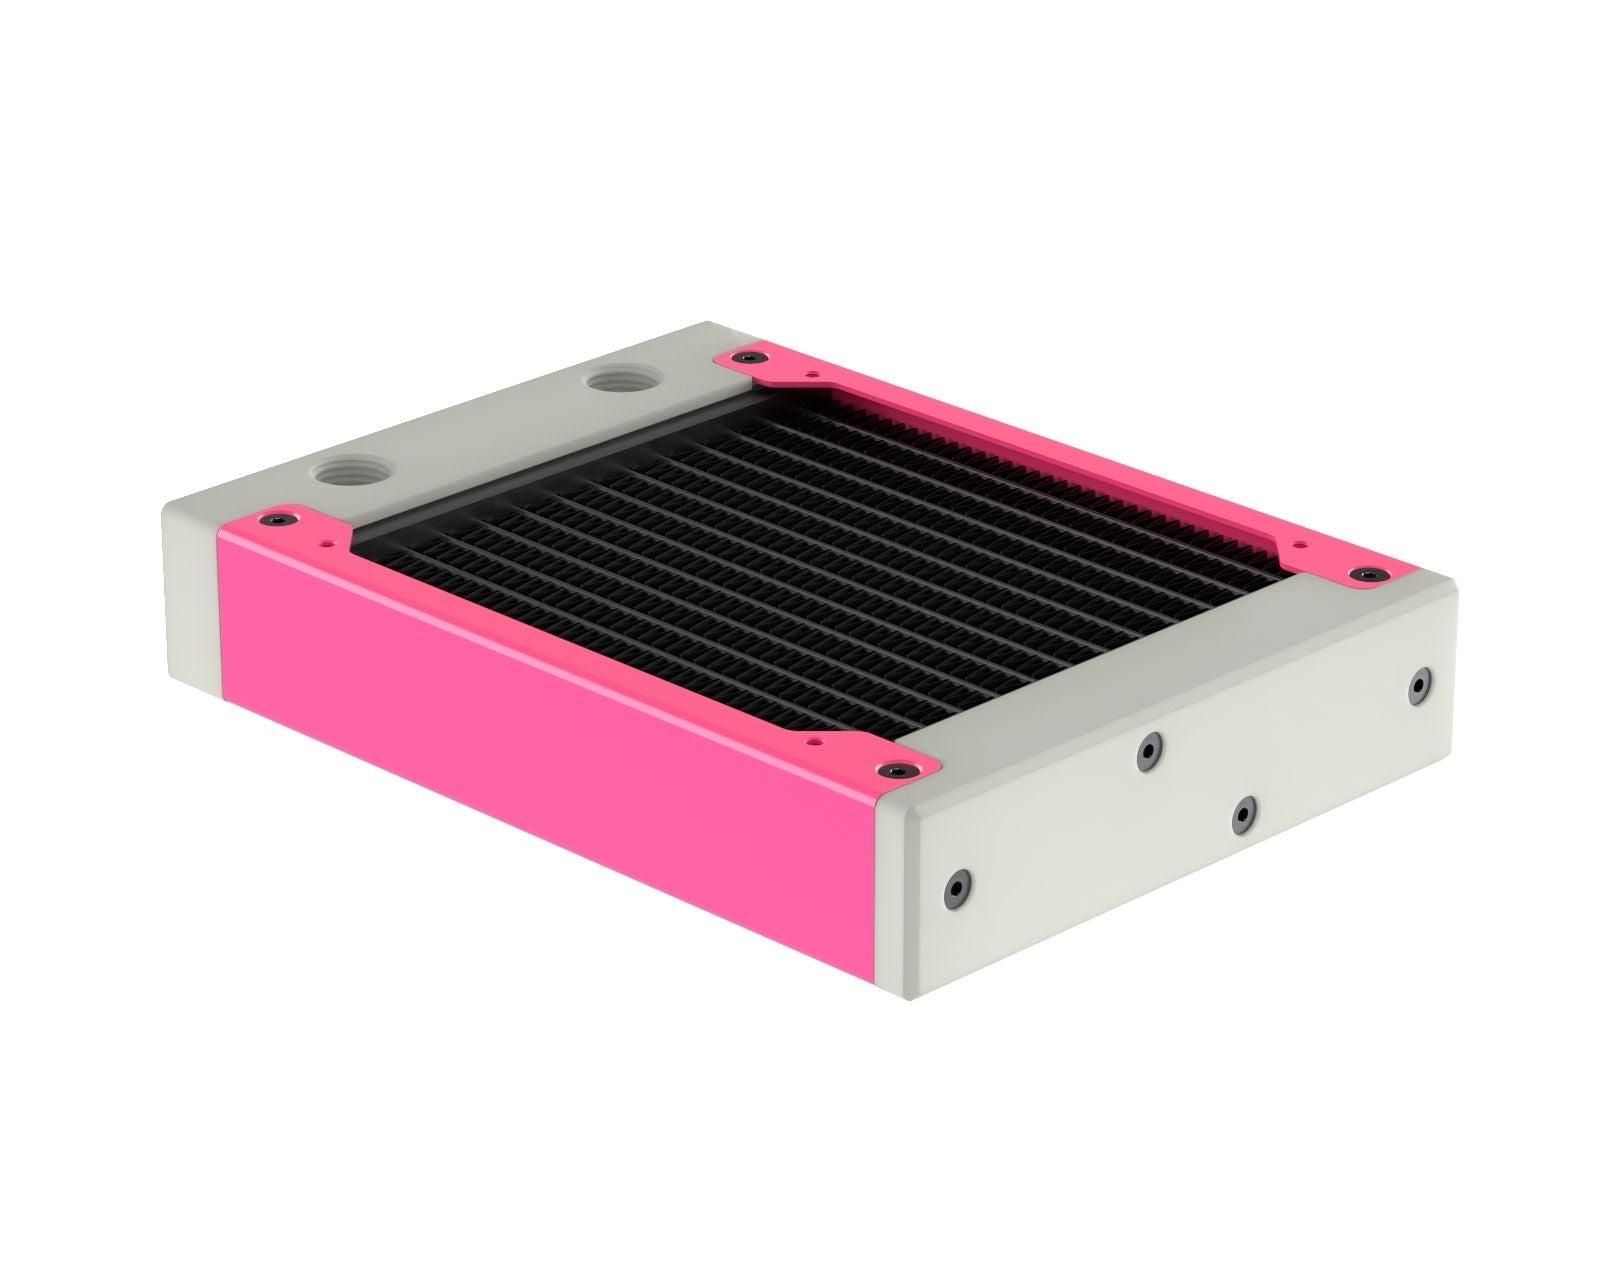 PrimoChill 120SL (30mm) EXIMO Modular Radiator, White POM, 1x120mm, Single Fan (R-SL-W12) Available in 20+ Colors, Assembled in USA and Custom Watercooling Loop Ready - UV Pink